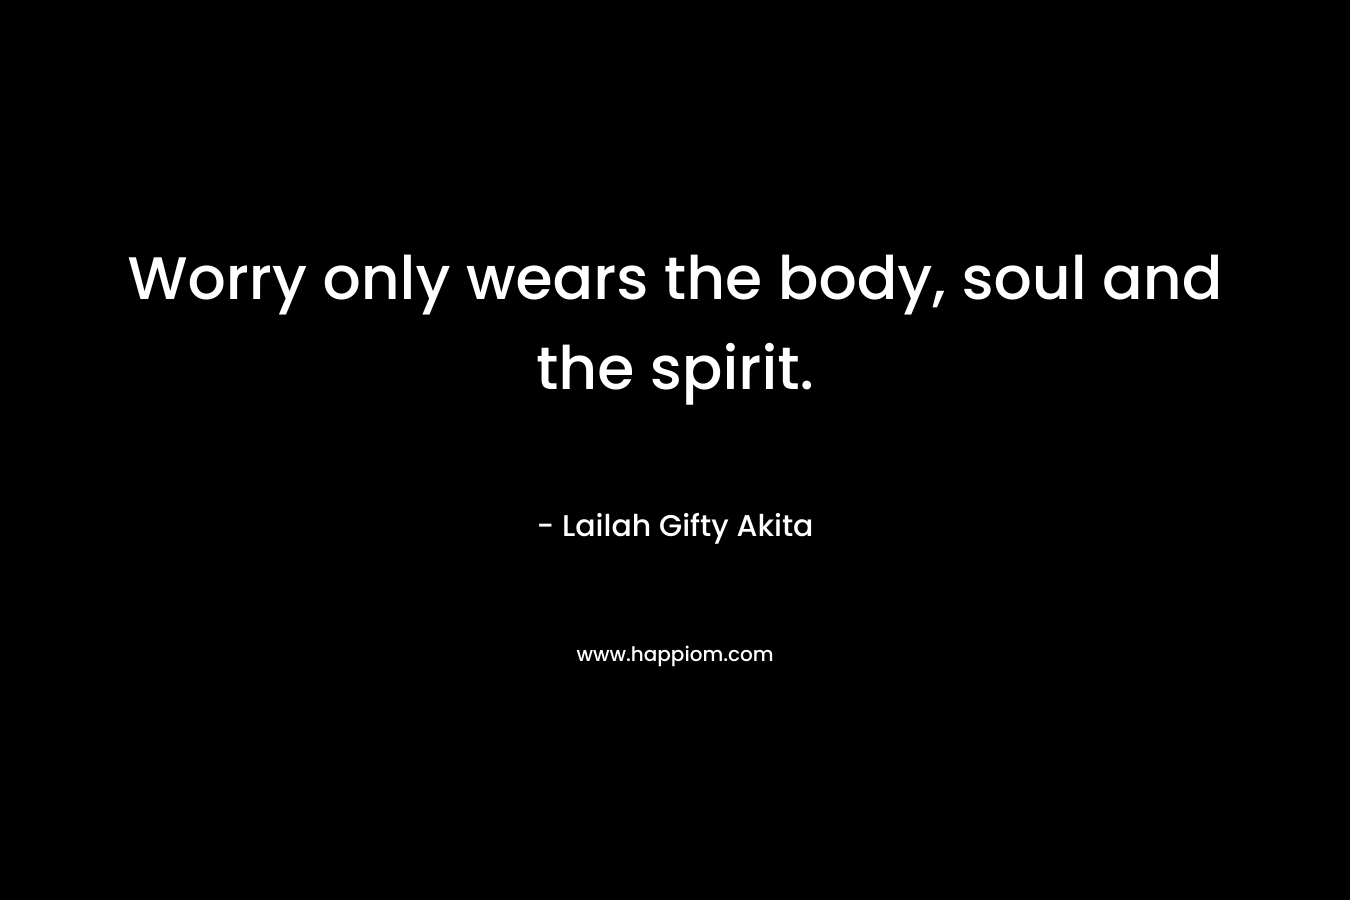 Worry only wears the body, soul and the spirit.